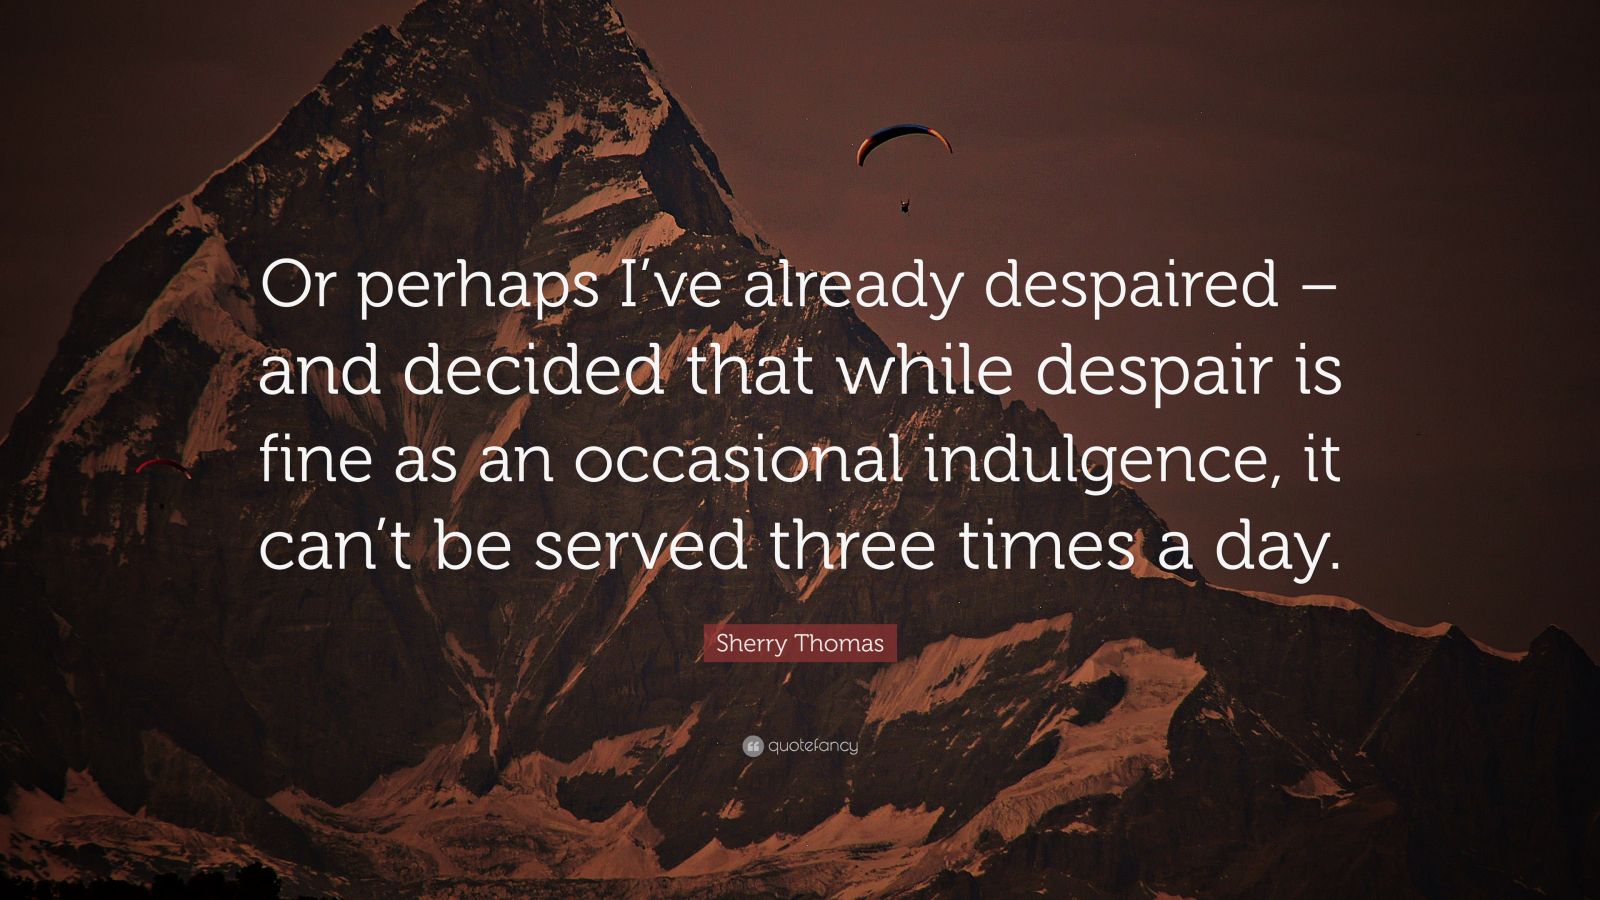 Sherry Thomas Quote Or Perhaps I Ve Already Despaired And Decided That While Despair Is Fine As An Occasional Indulgence It Can T Be Serv 2 Wallpapers Quotefancy